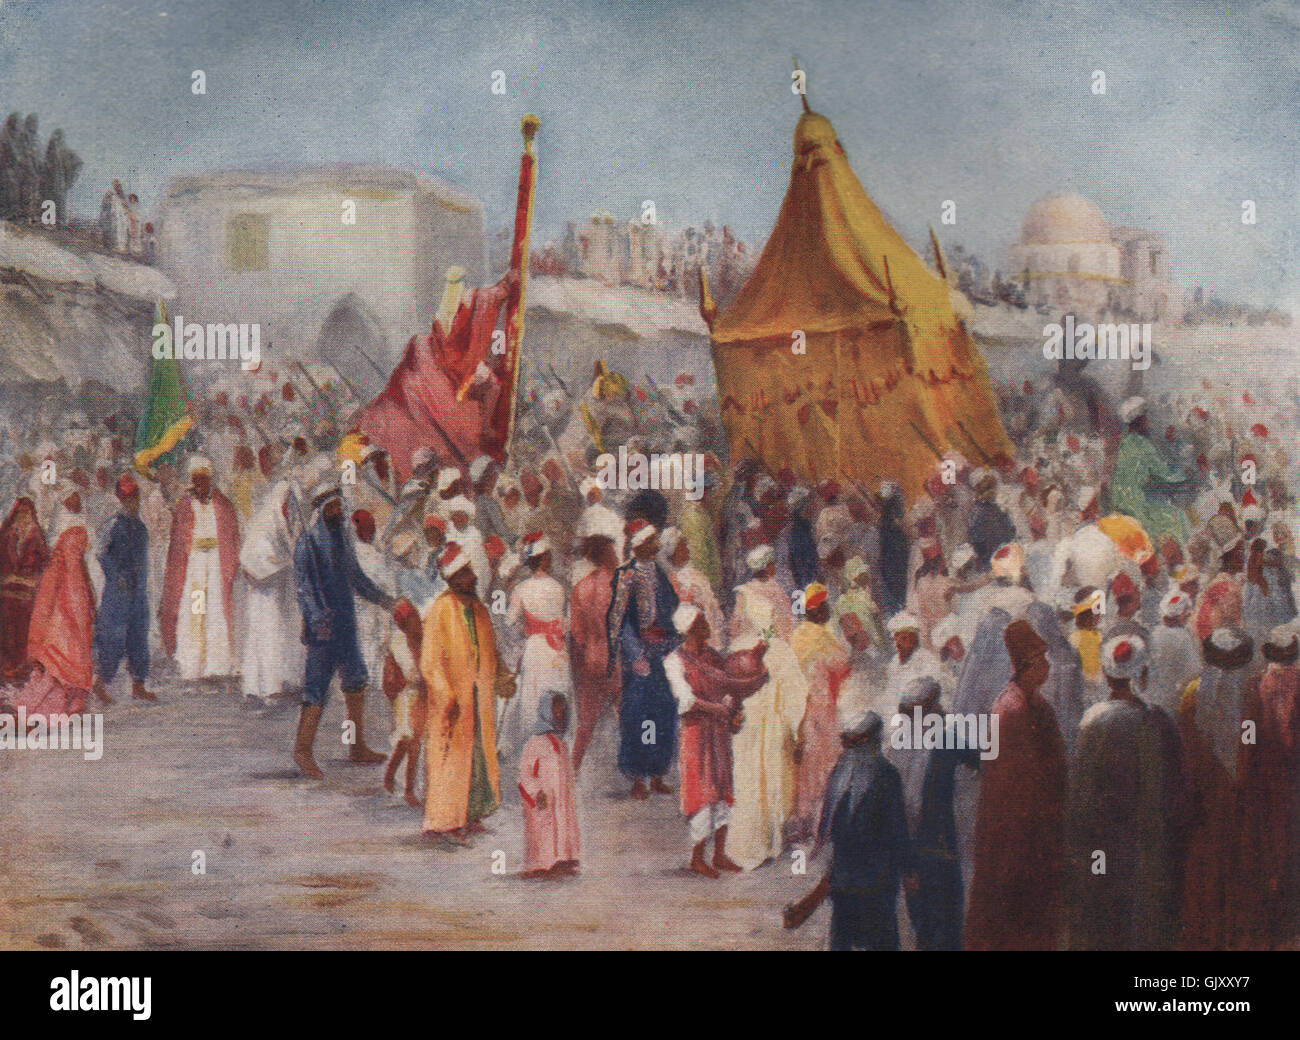 'Return of the Haj from Mecca to Damascus' by Margaret Thomas. Syria, 1908 Stock Photo